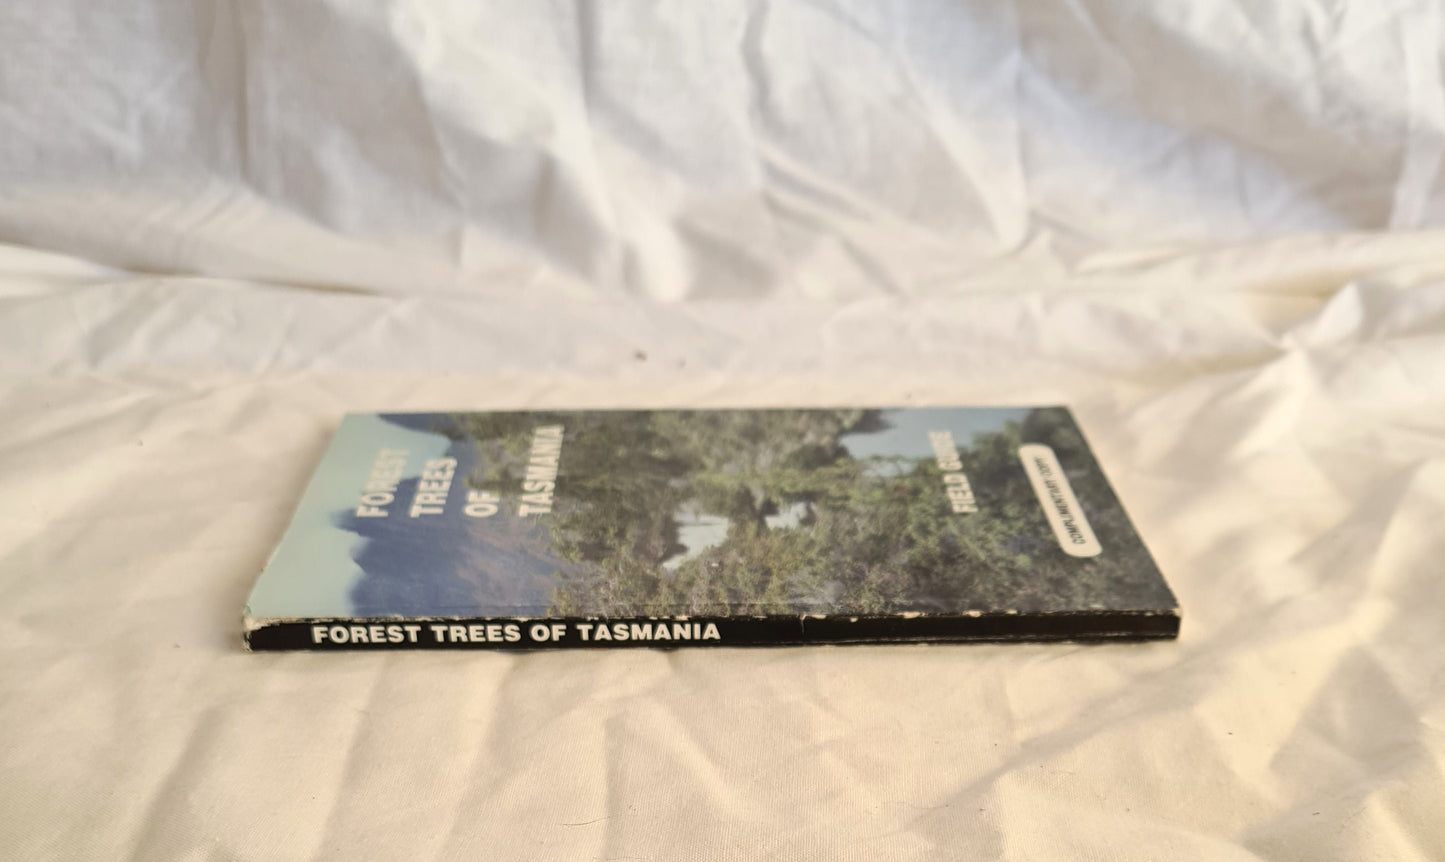 Forest Trees of Tasmania by Peter Naughton